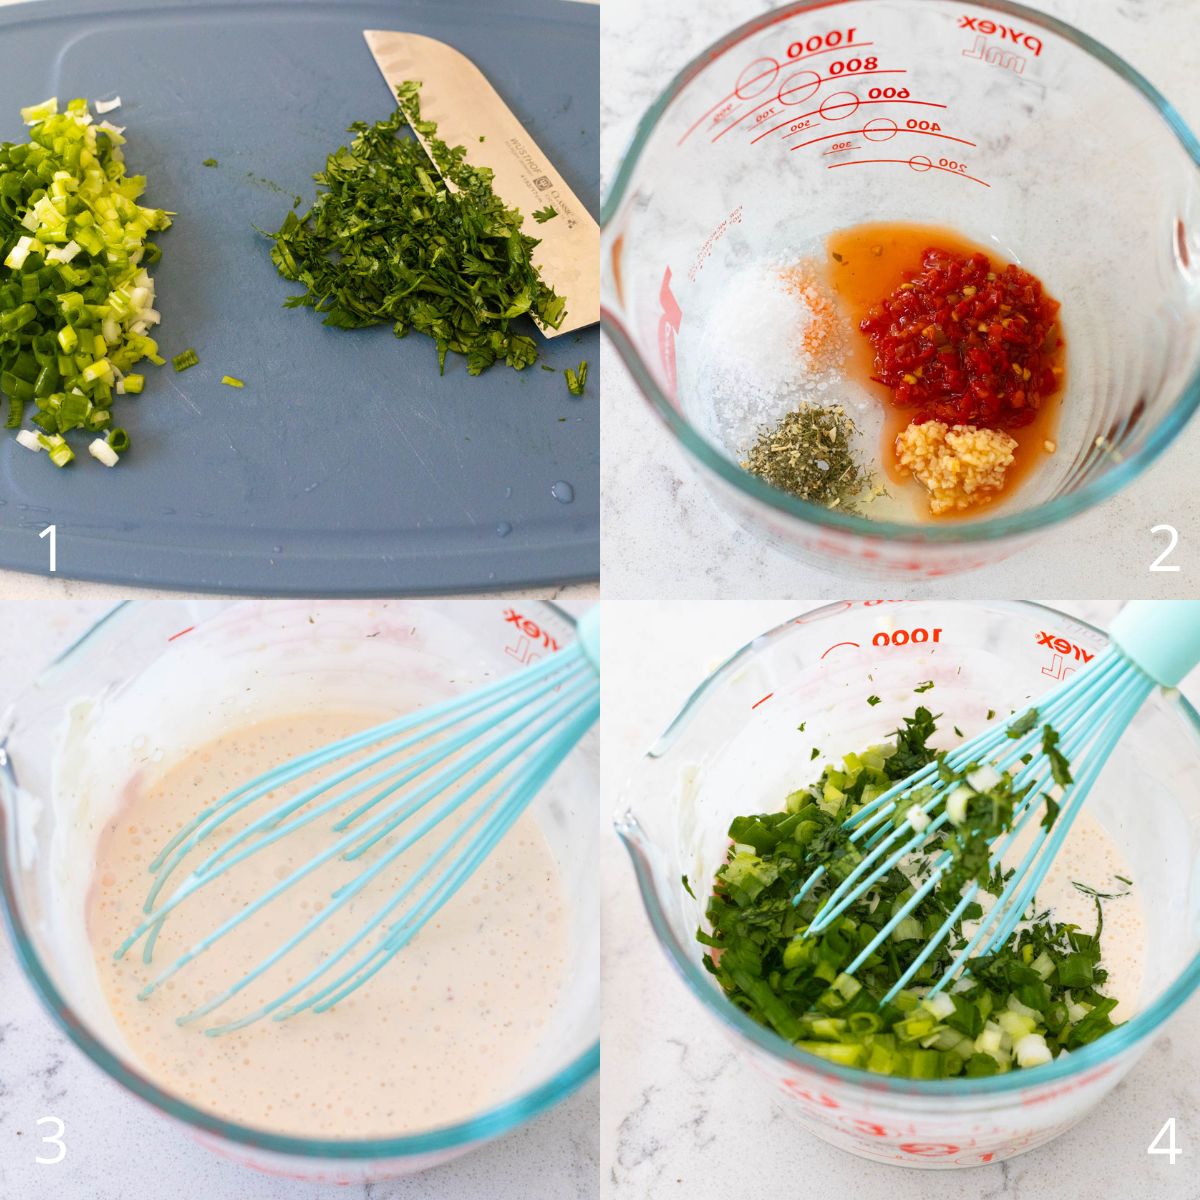 The step by step photos show how to whisk together an easy homemade ranch dressing for potato salad.